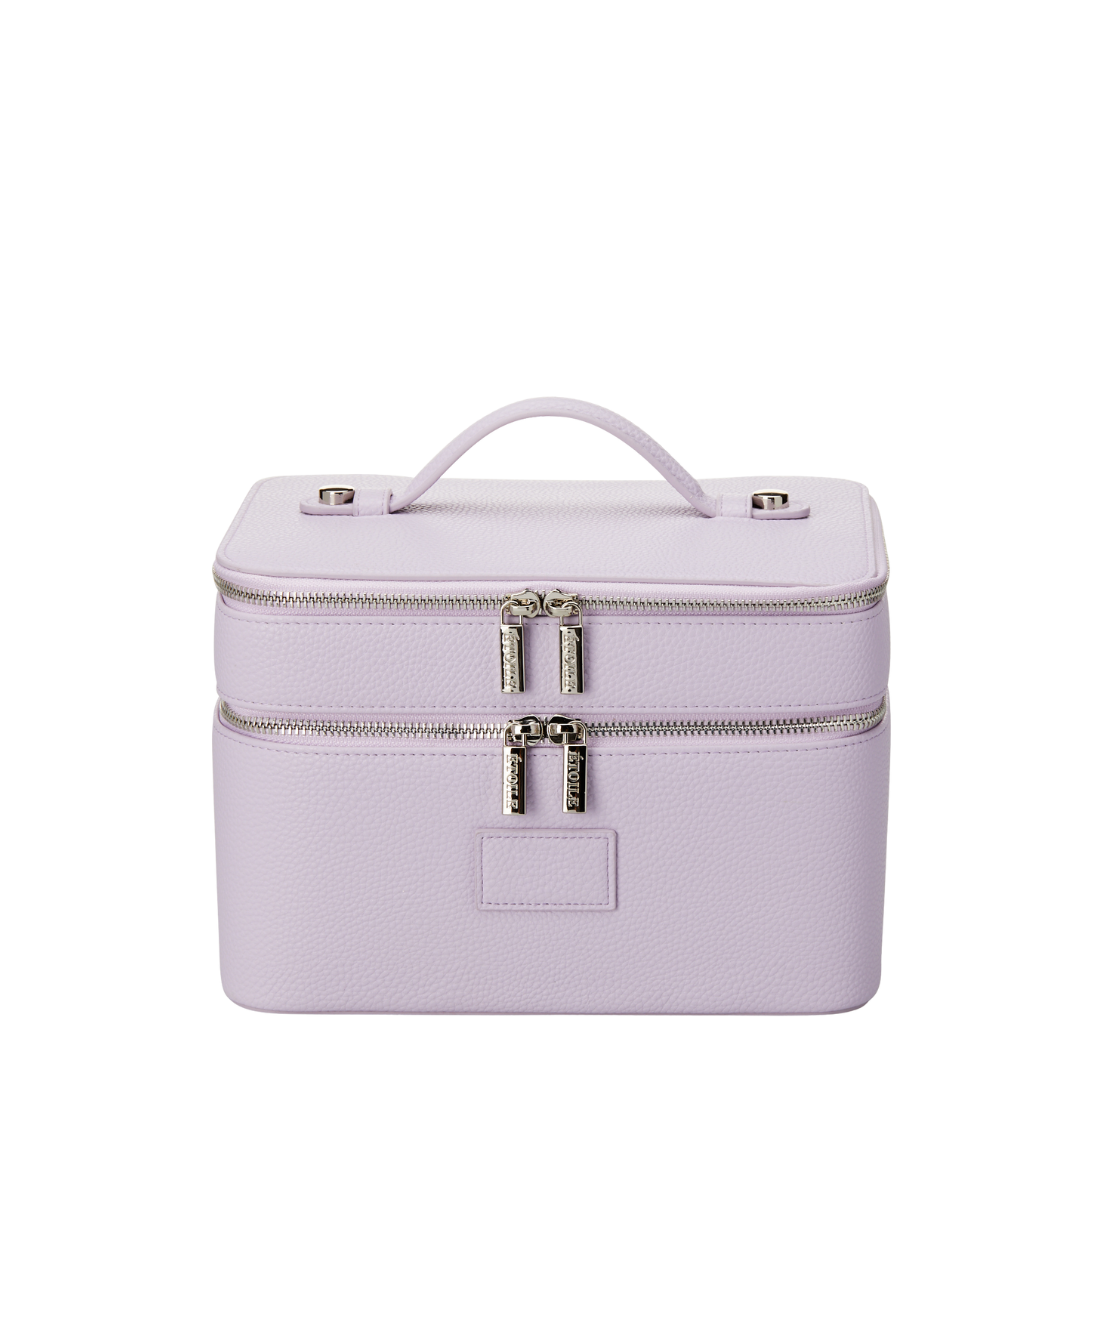 A structured vanity case with double zipperheads and a collapsible handle.